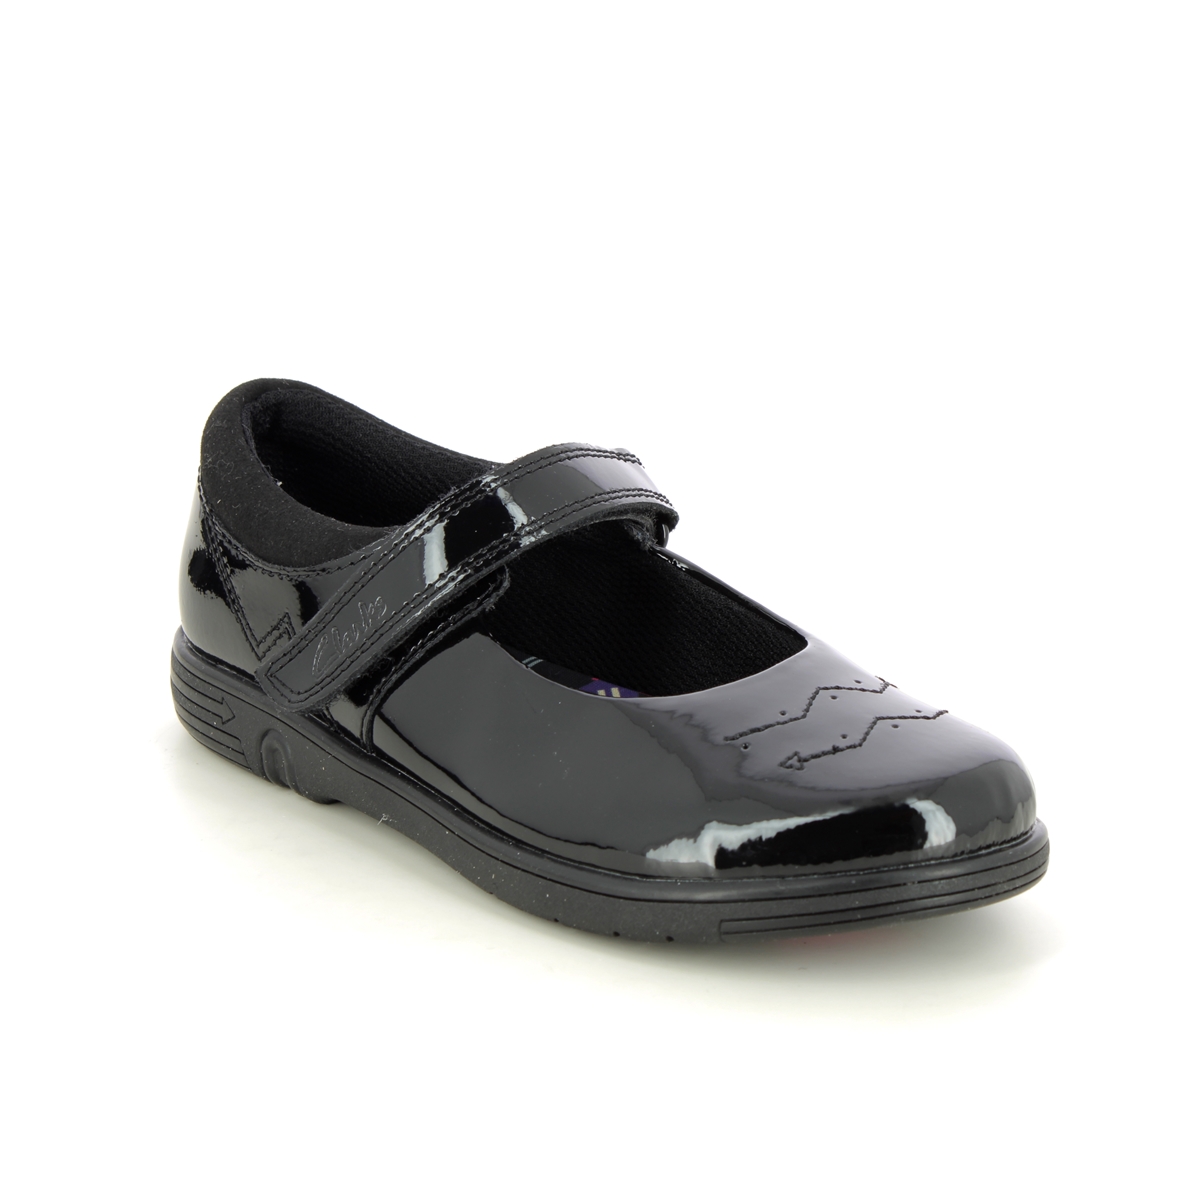 Clarks Jazzy Jig K Mary Jane Black Patent Kids Girls School Shoes 753086F In Size 13 In Plain Black Patent F Width Fitting Regular Fit For School For